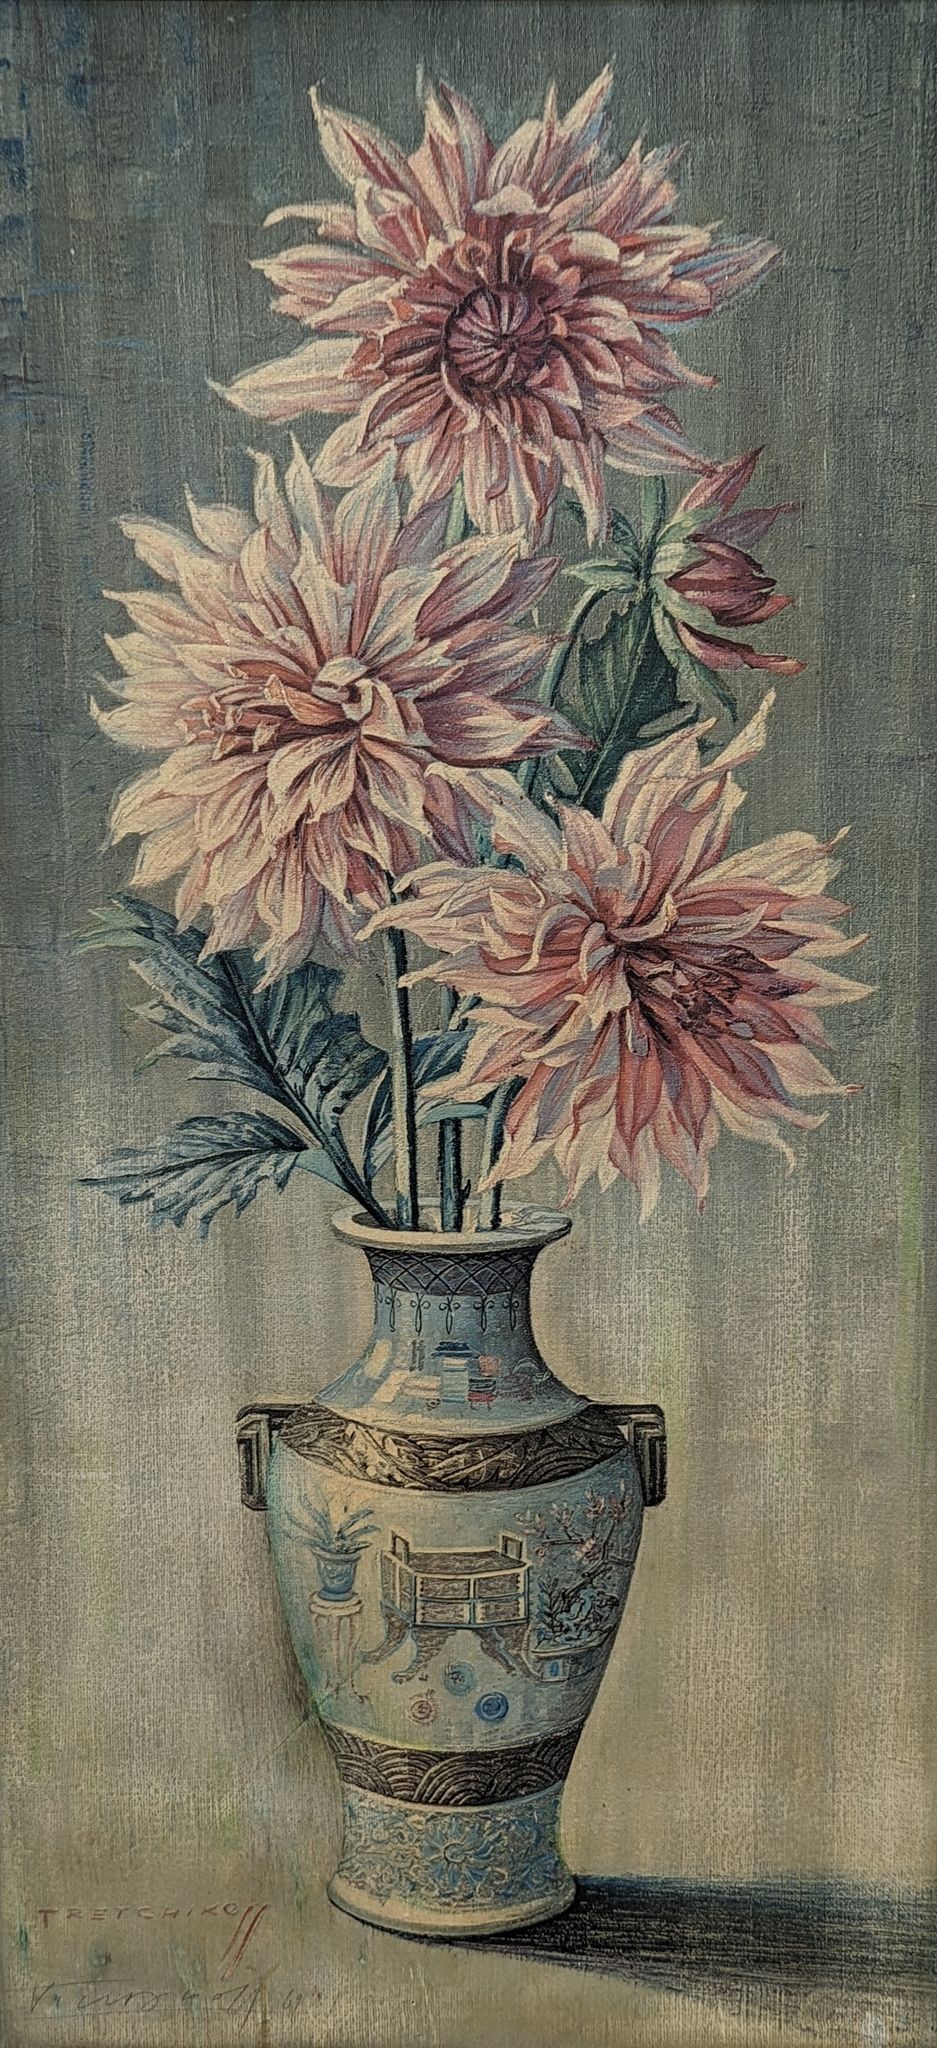 After Tretchikoff, colour print, Chrysanthemums in a Chinese vase, signed in the plate and also appears to be signed in pencil, 90 x 43cm